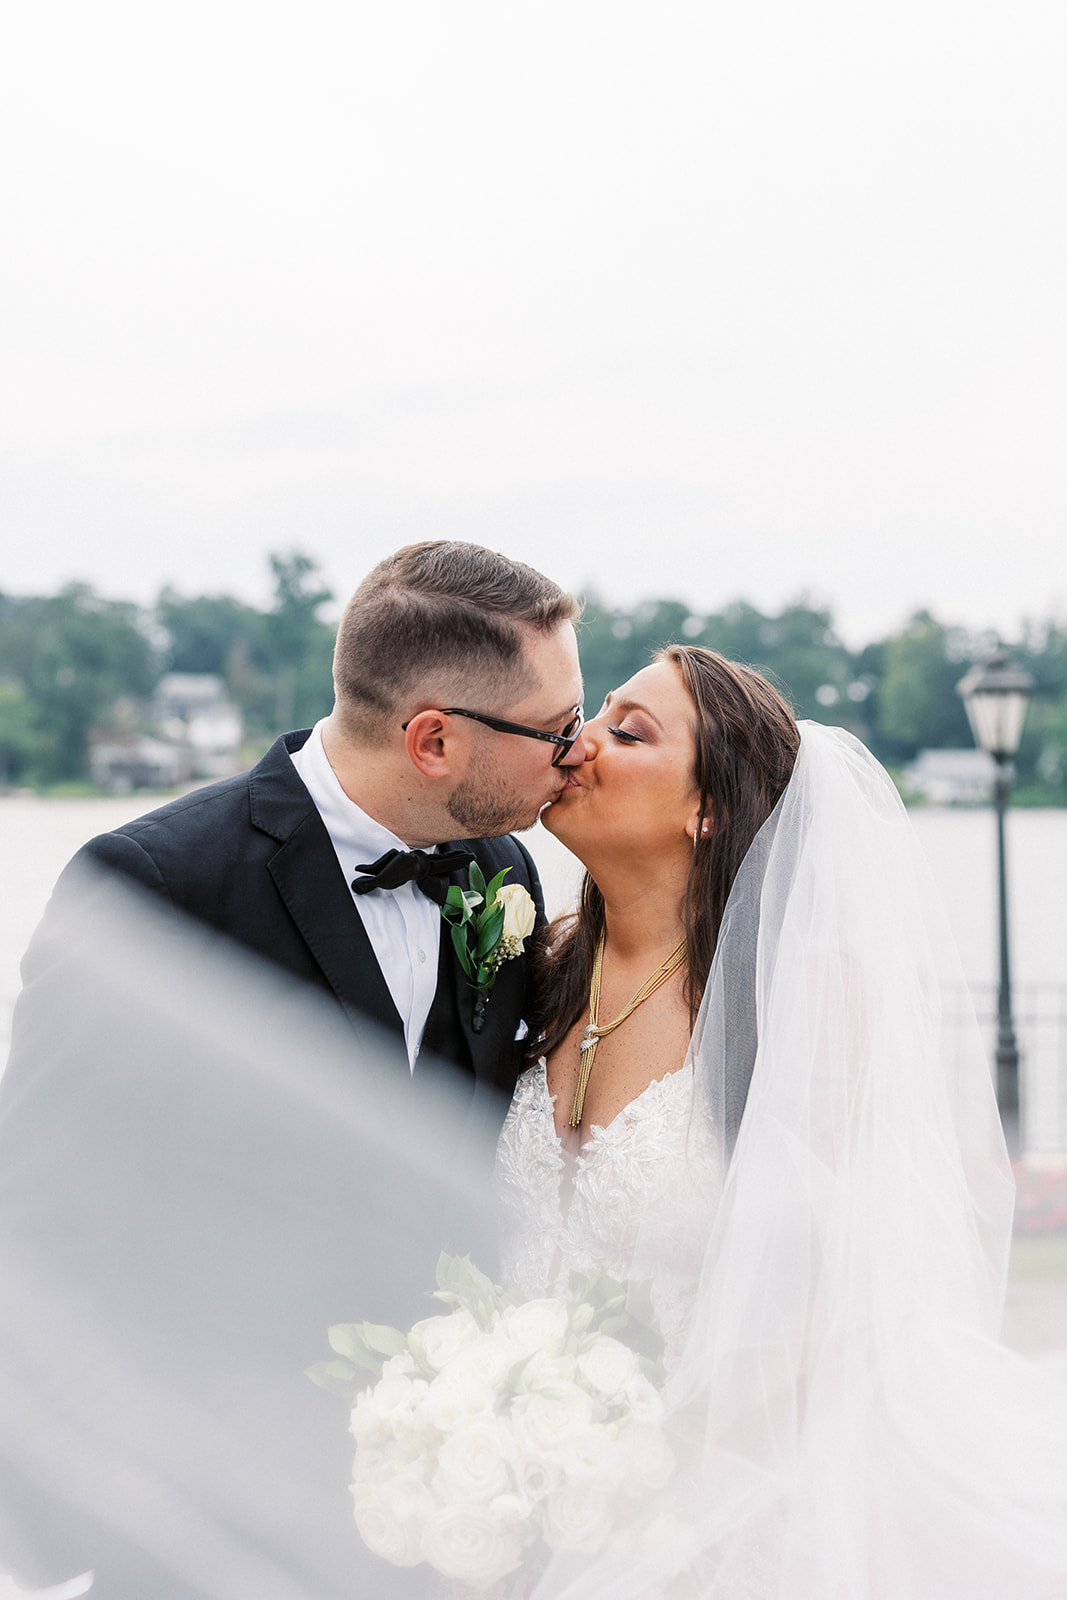 Newlyweds kiss while standing in a park wrapped in a long veil at a Waterside Events Wedding